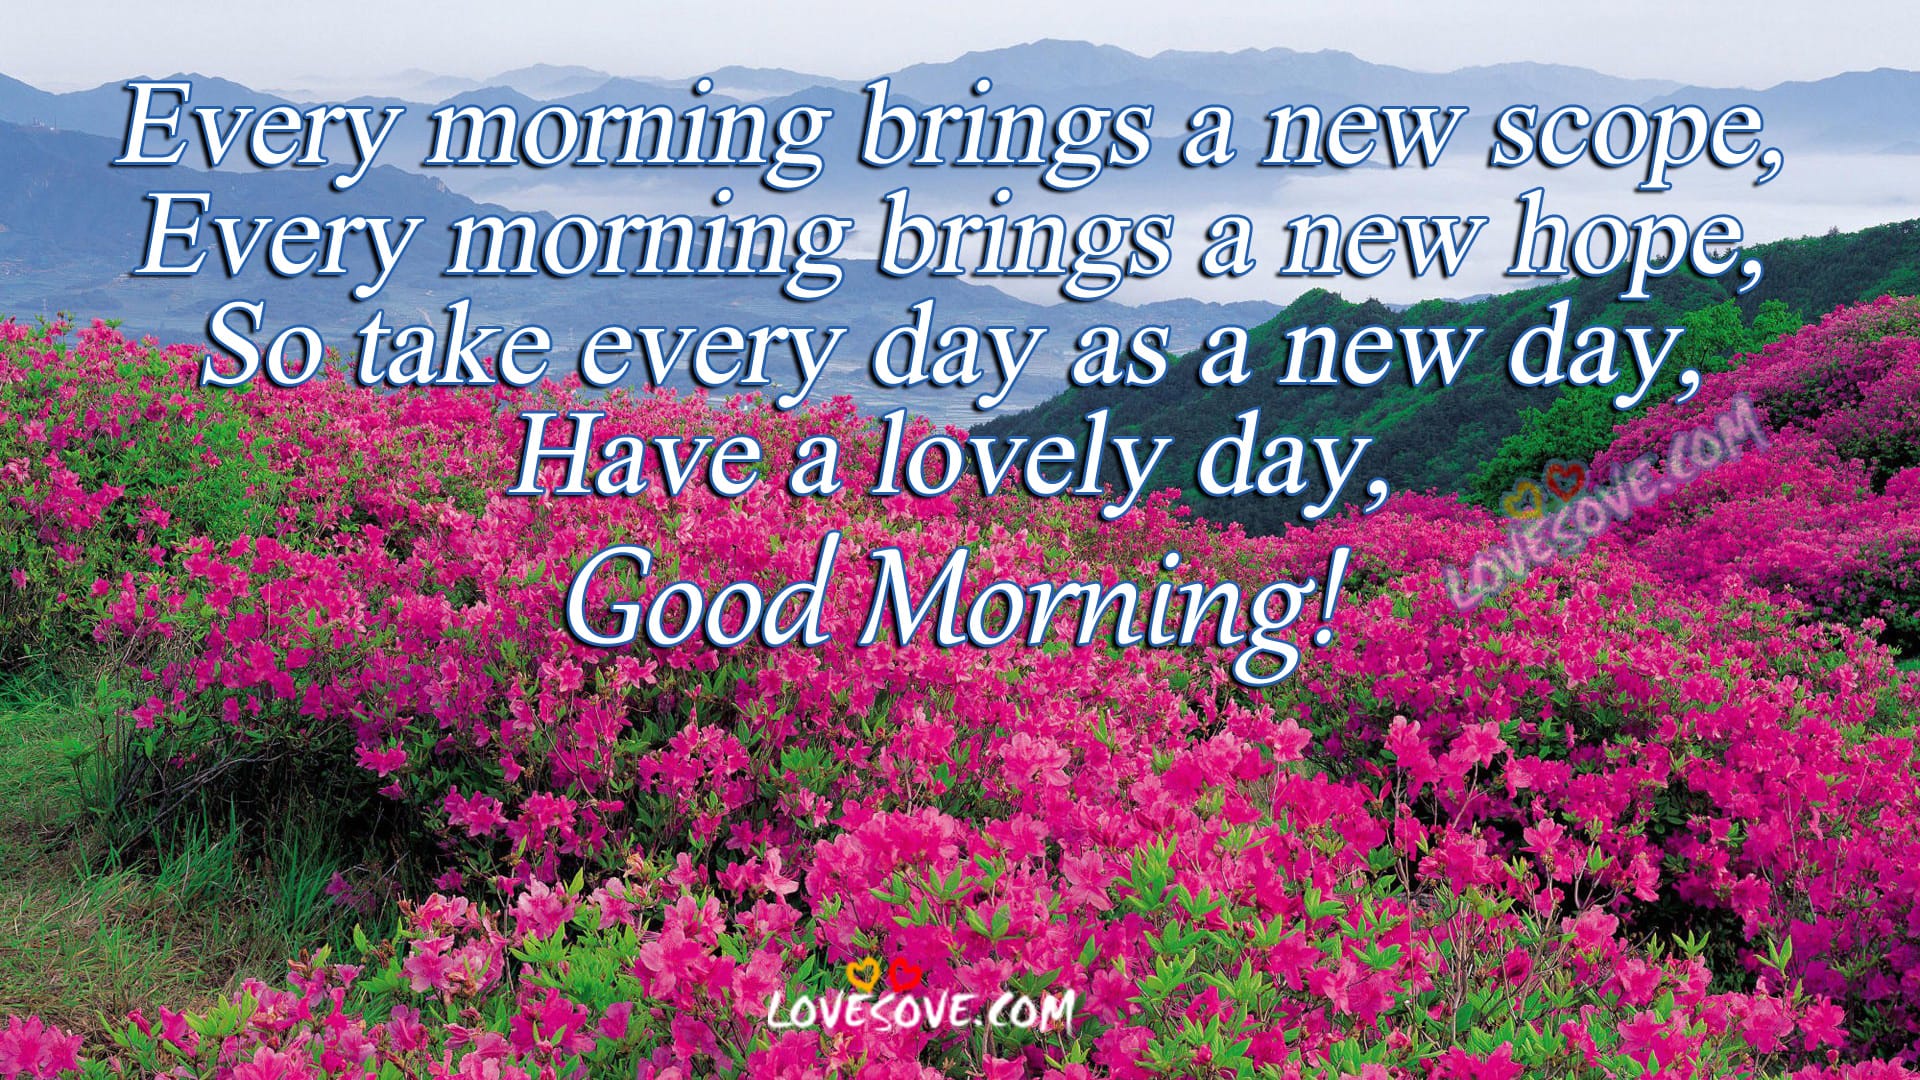 good morning wiahes image lovesove com, images